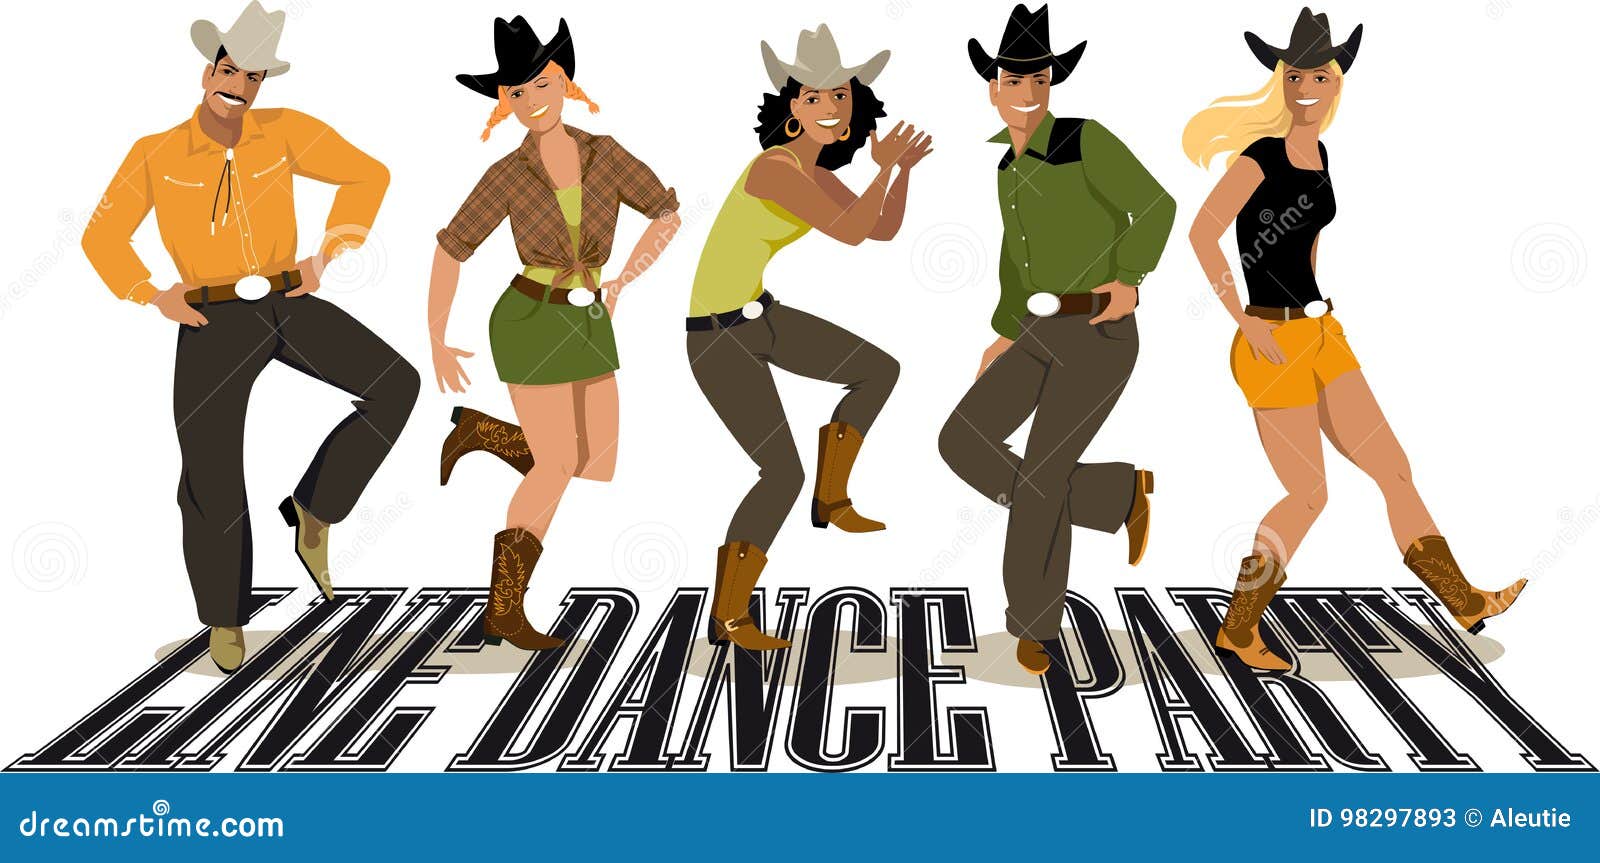 Country Line Dancing Stock Illustrations 78 Country Line Dancing Stock Illustrations Vectors Clipart Dreamstime Sun of jamaica, the dreams of malaika your love is my sweet memory sun of jamaica, blue lady malaika some day i'll return, wait and see walk in the sand and l'm happy with you we shall be loving and true oh i sure love malaika with all of my heart i will always be faithful and true, yeah true. https www dreamstime com stock illustration group people western country clothes dancing line dance eps vector illustration line dance party image98297893